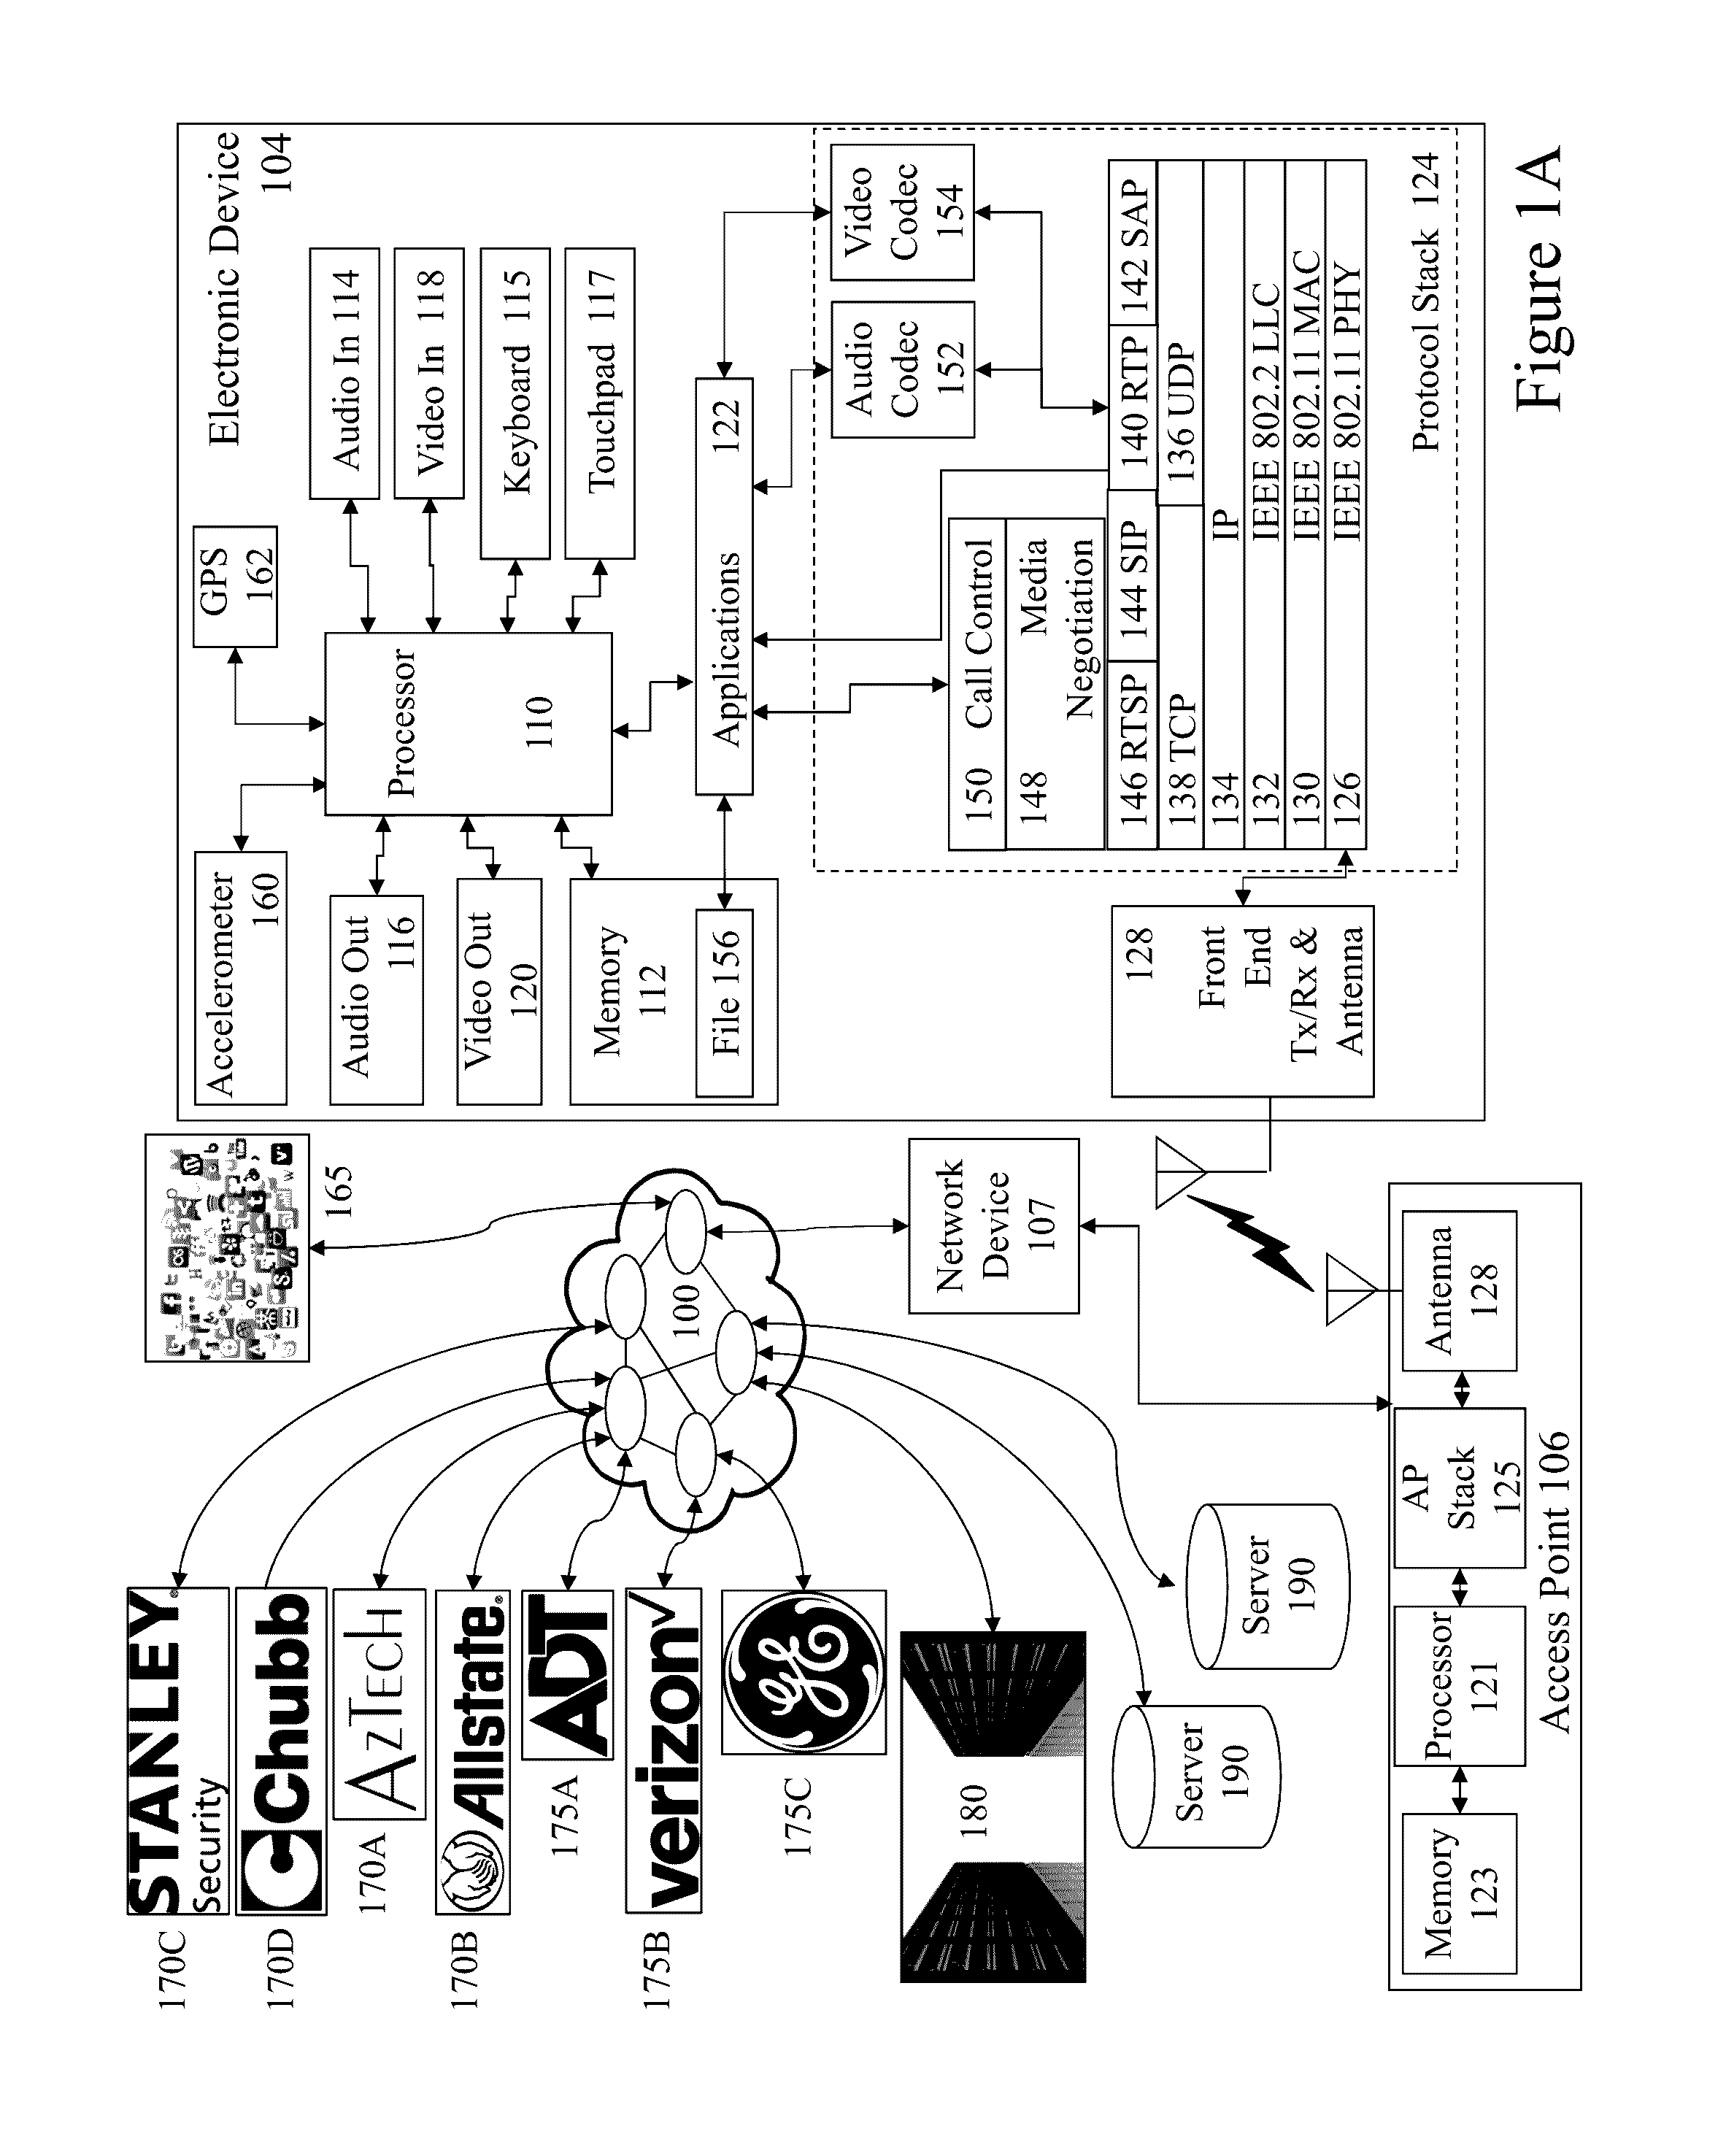 System-based control of programmable devices